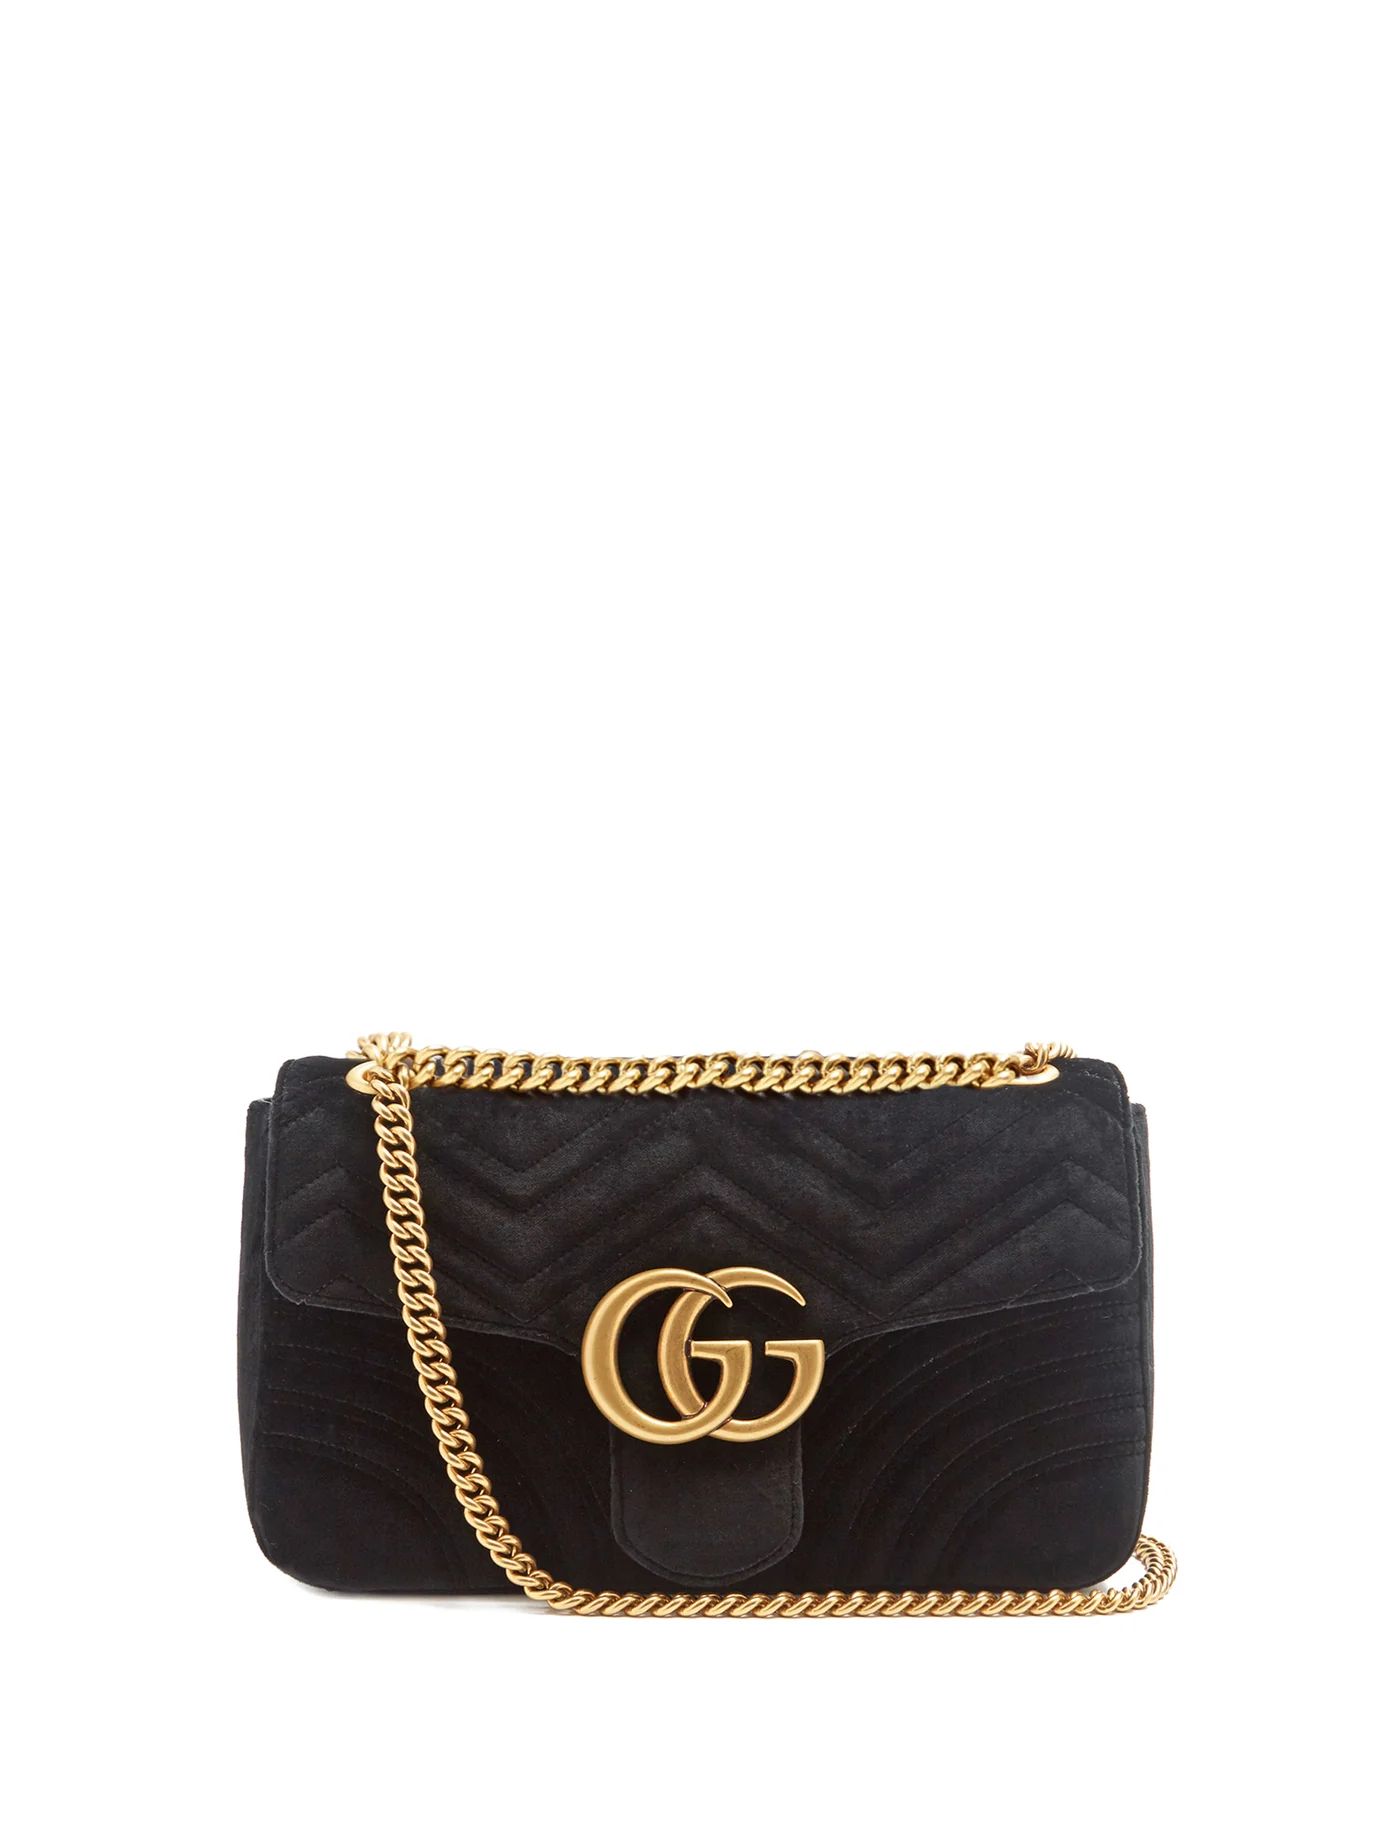 GG Marmont mini quilted-velvet cross-body bag | Matches (US)